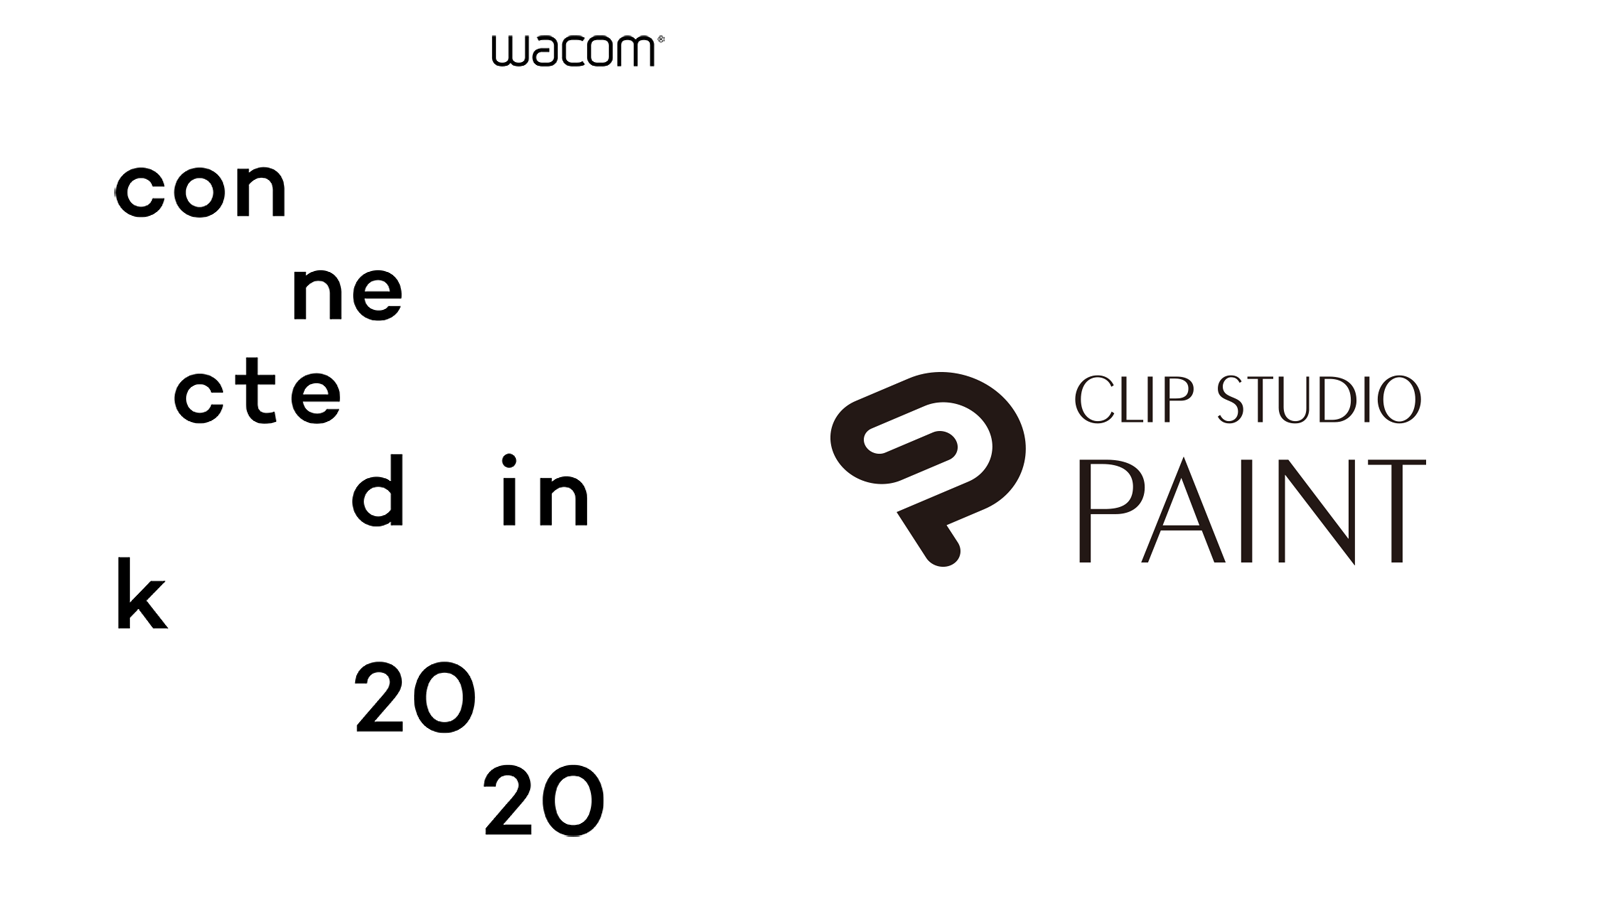 Clip Studio Paint Sponsors Wacom Connected Ink Event　Featuring two panel discussions, one with Samsung and Wacom, the other with Oiso Town and Wacom